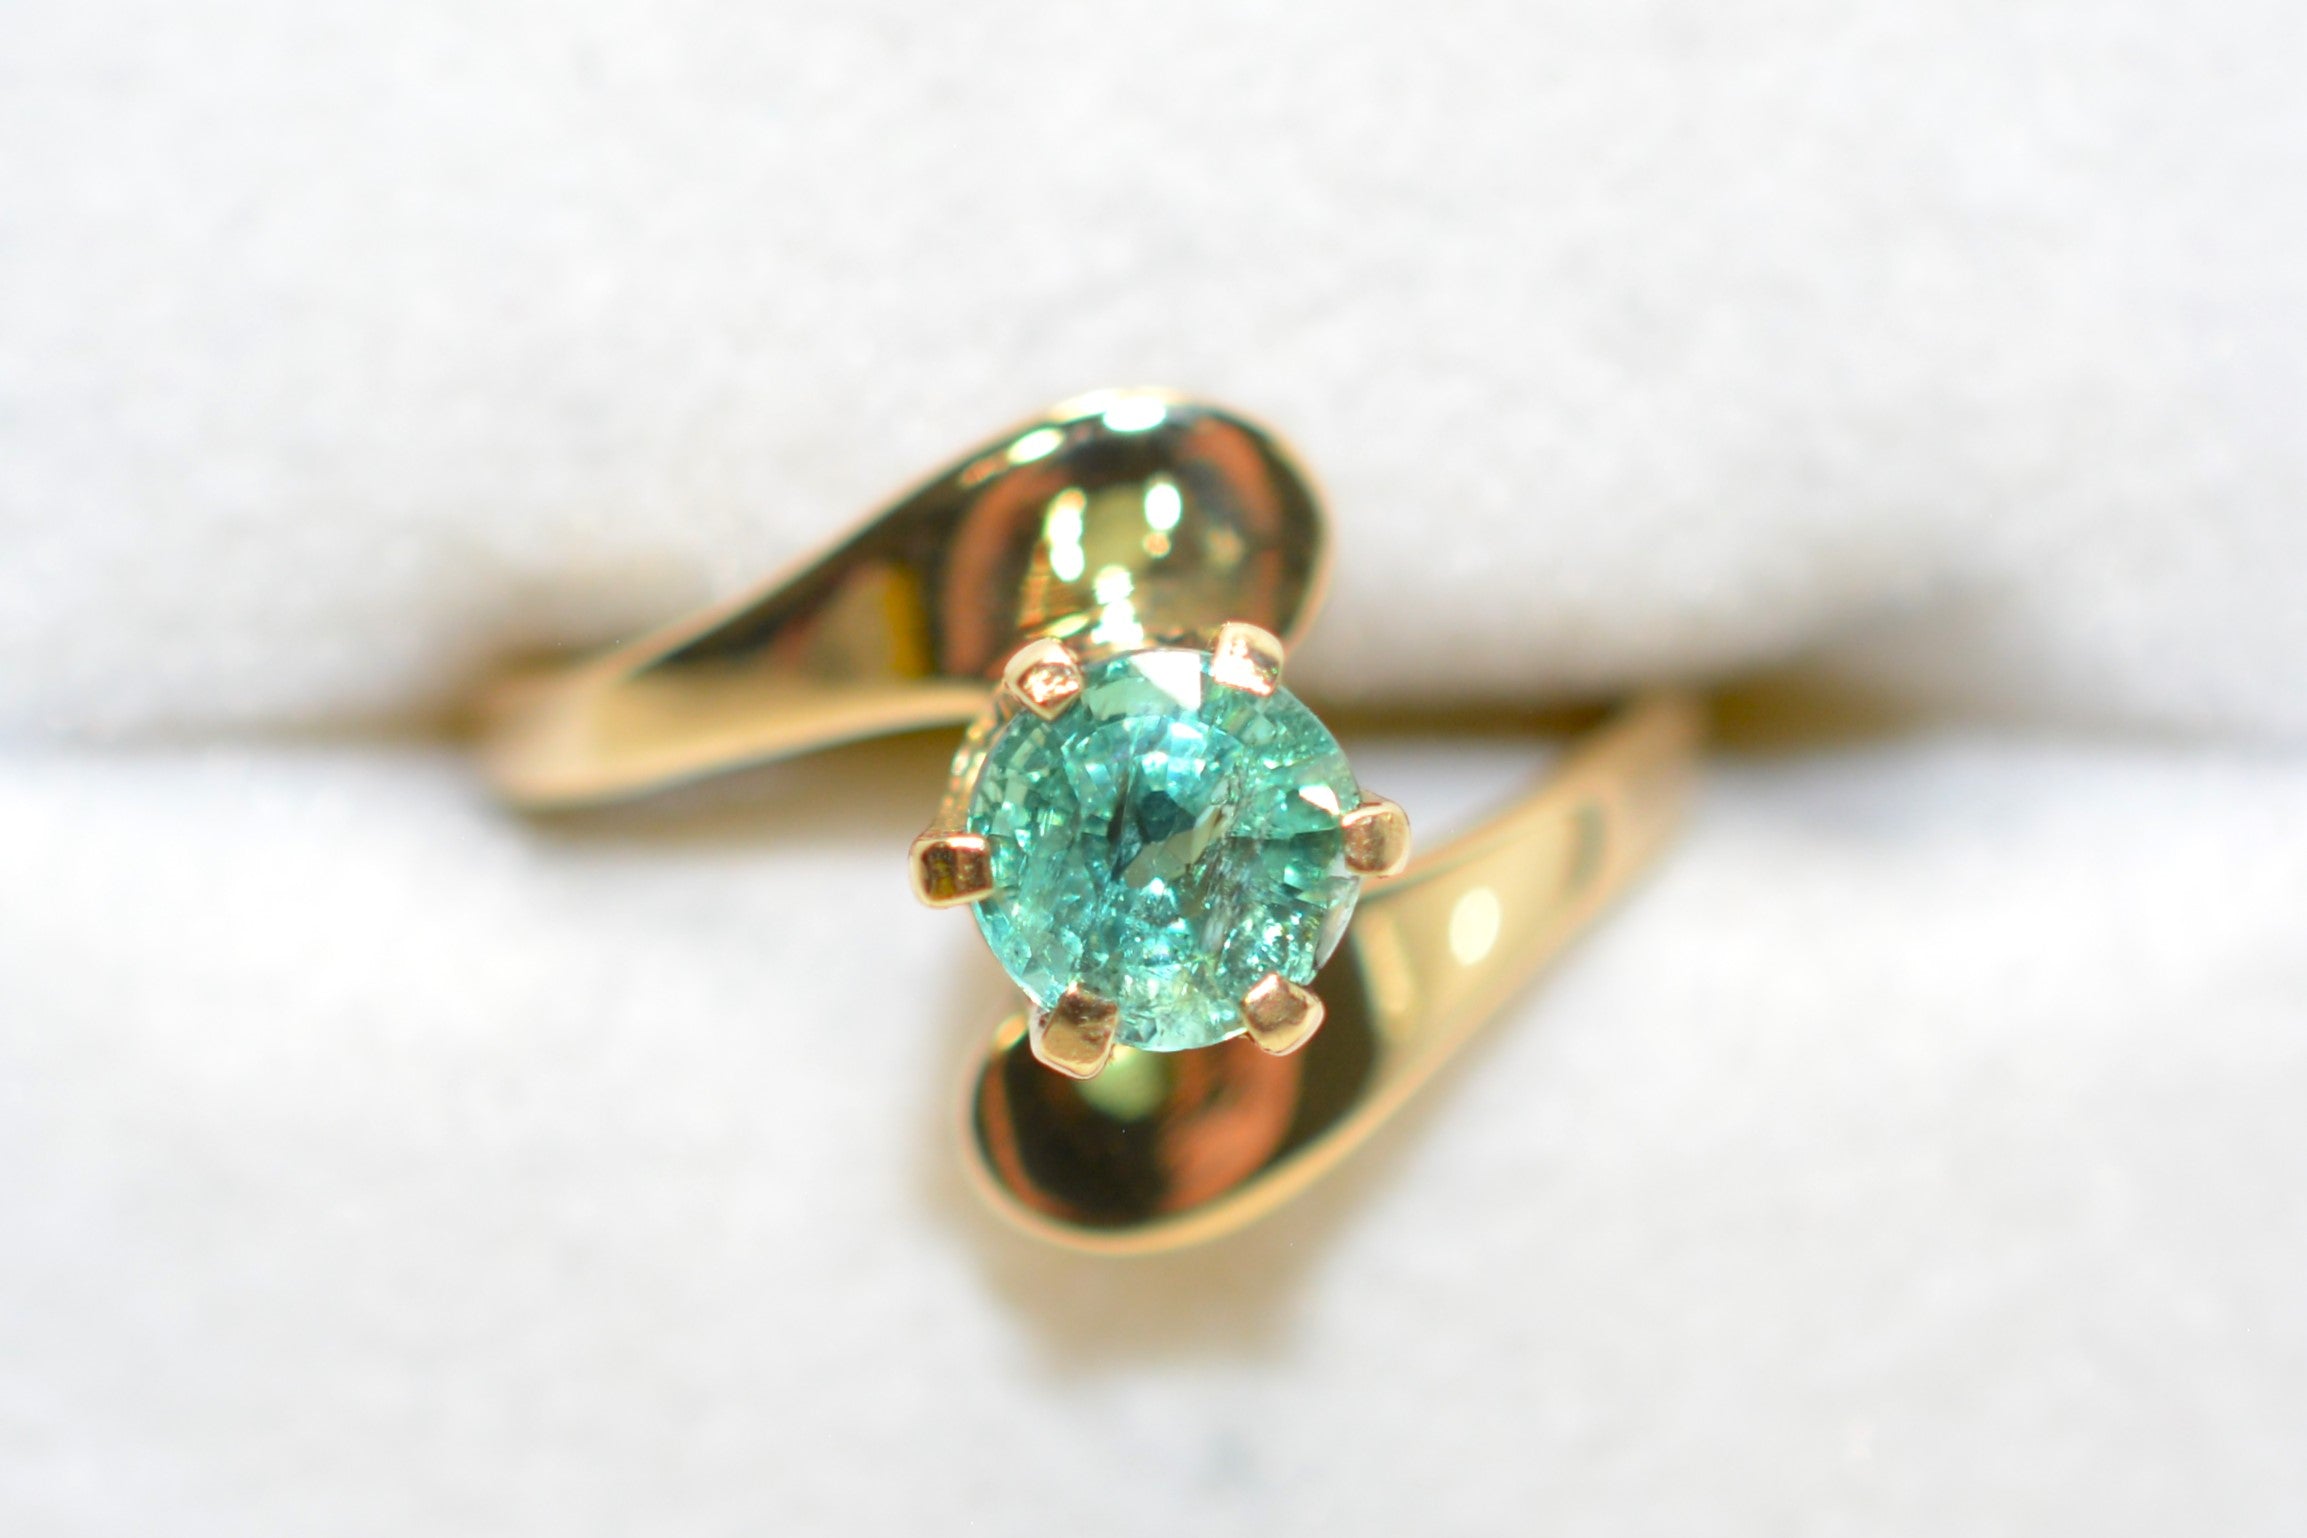 Natural Paraiba Tourmaline Ring 14K Solid Gold .72ct Solitaire Ring Fine Womens Ring Estate Jewelry Gemstone Ring Statement Ring Birthstone